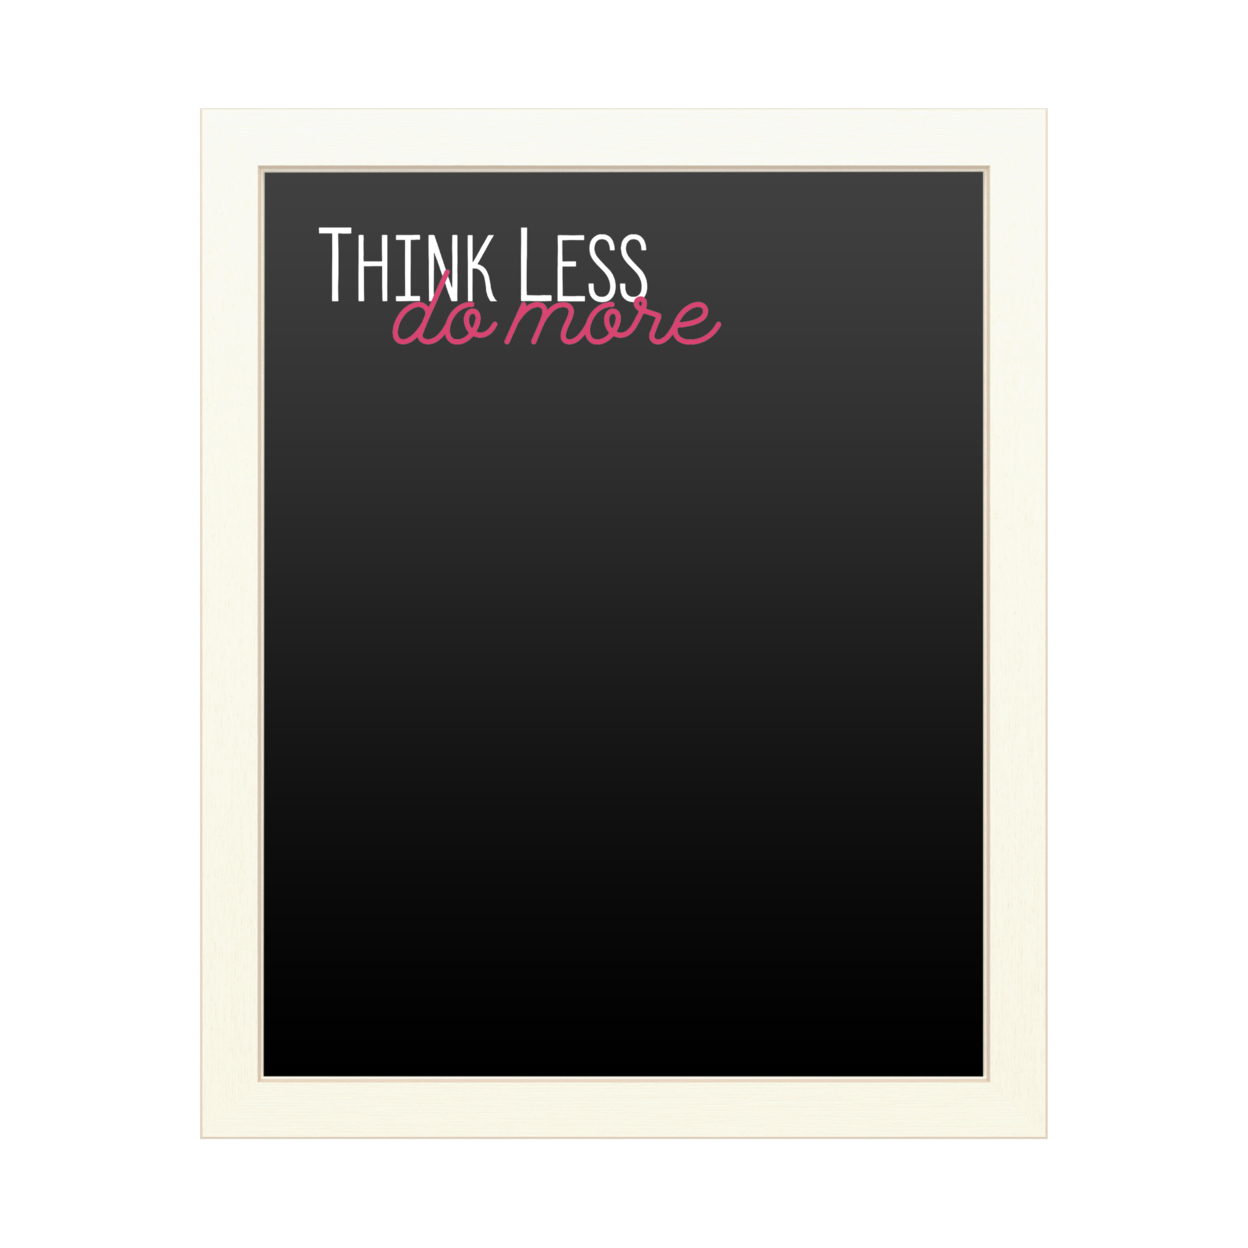 16 X 20 Chalk Board With Printed Artwork - Think Less Do More White Board - Ready To Hang Chalkboard